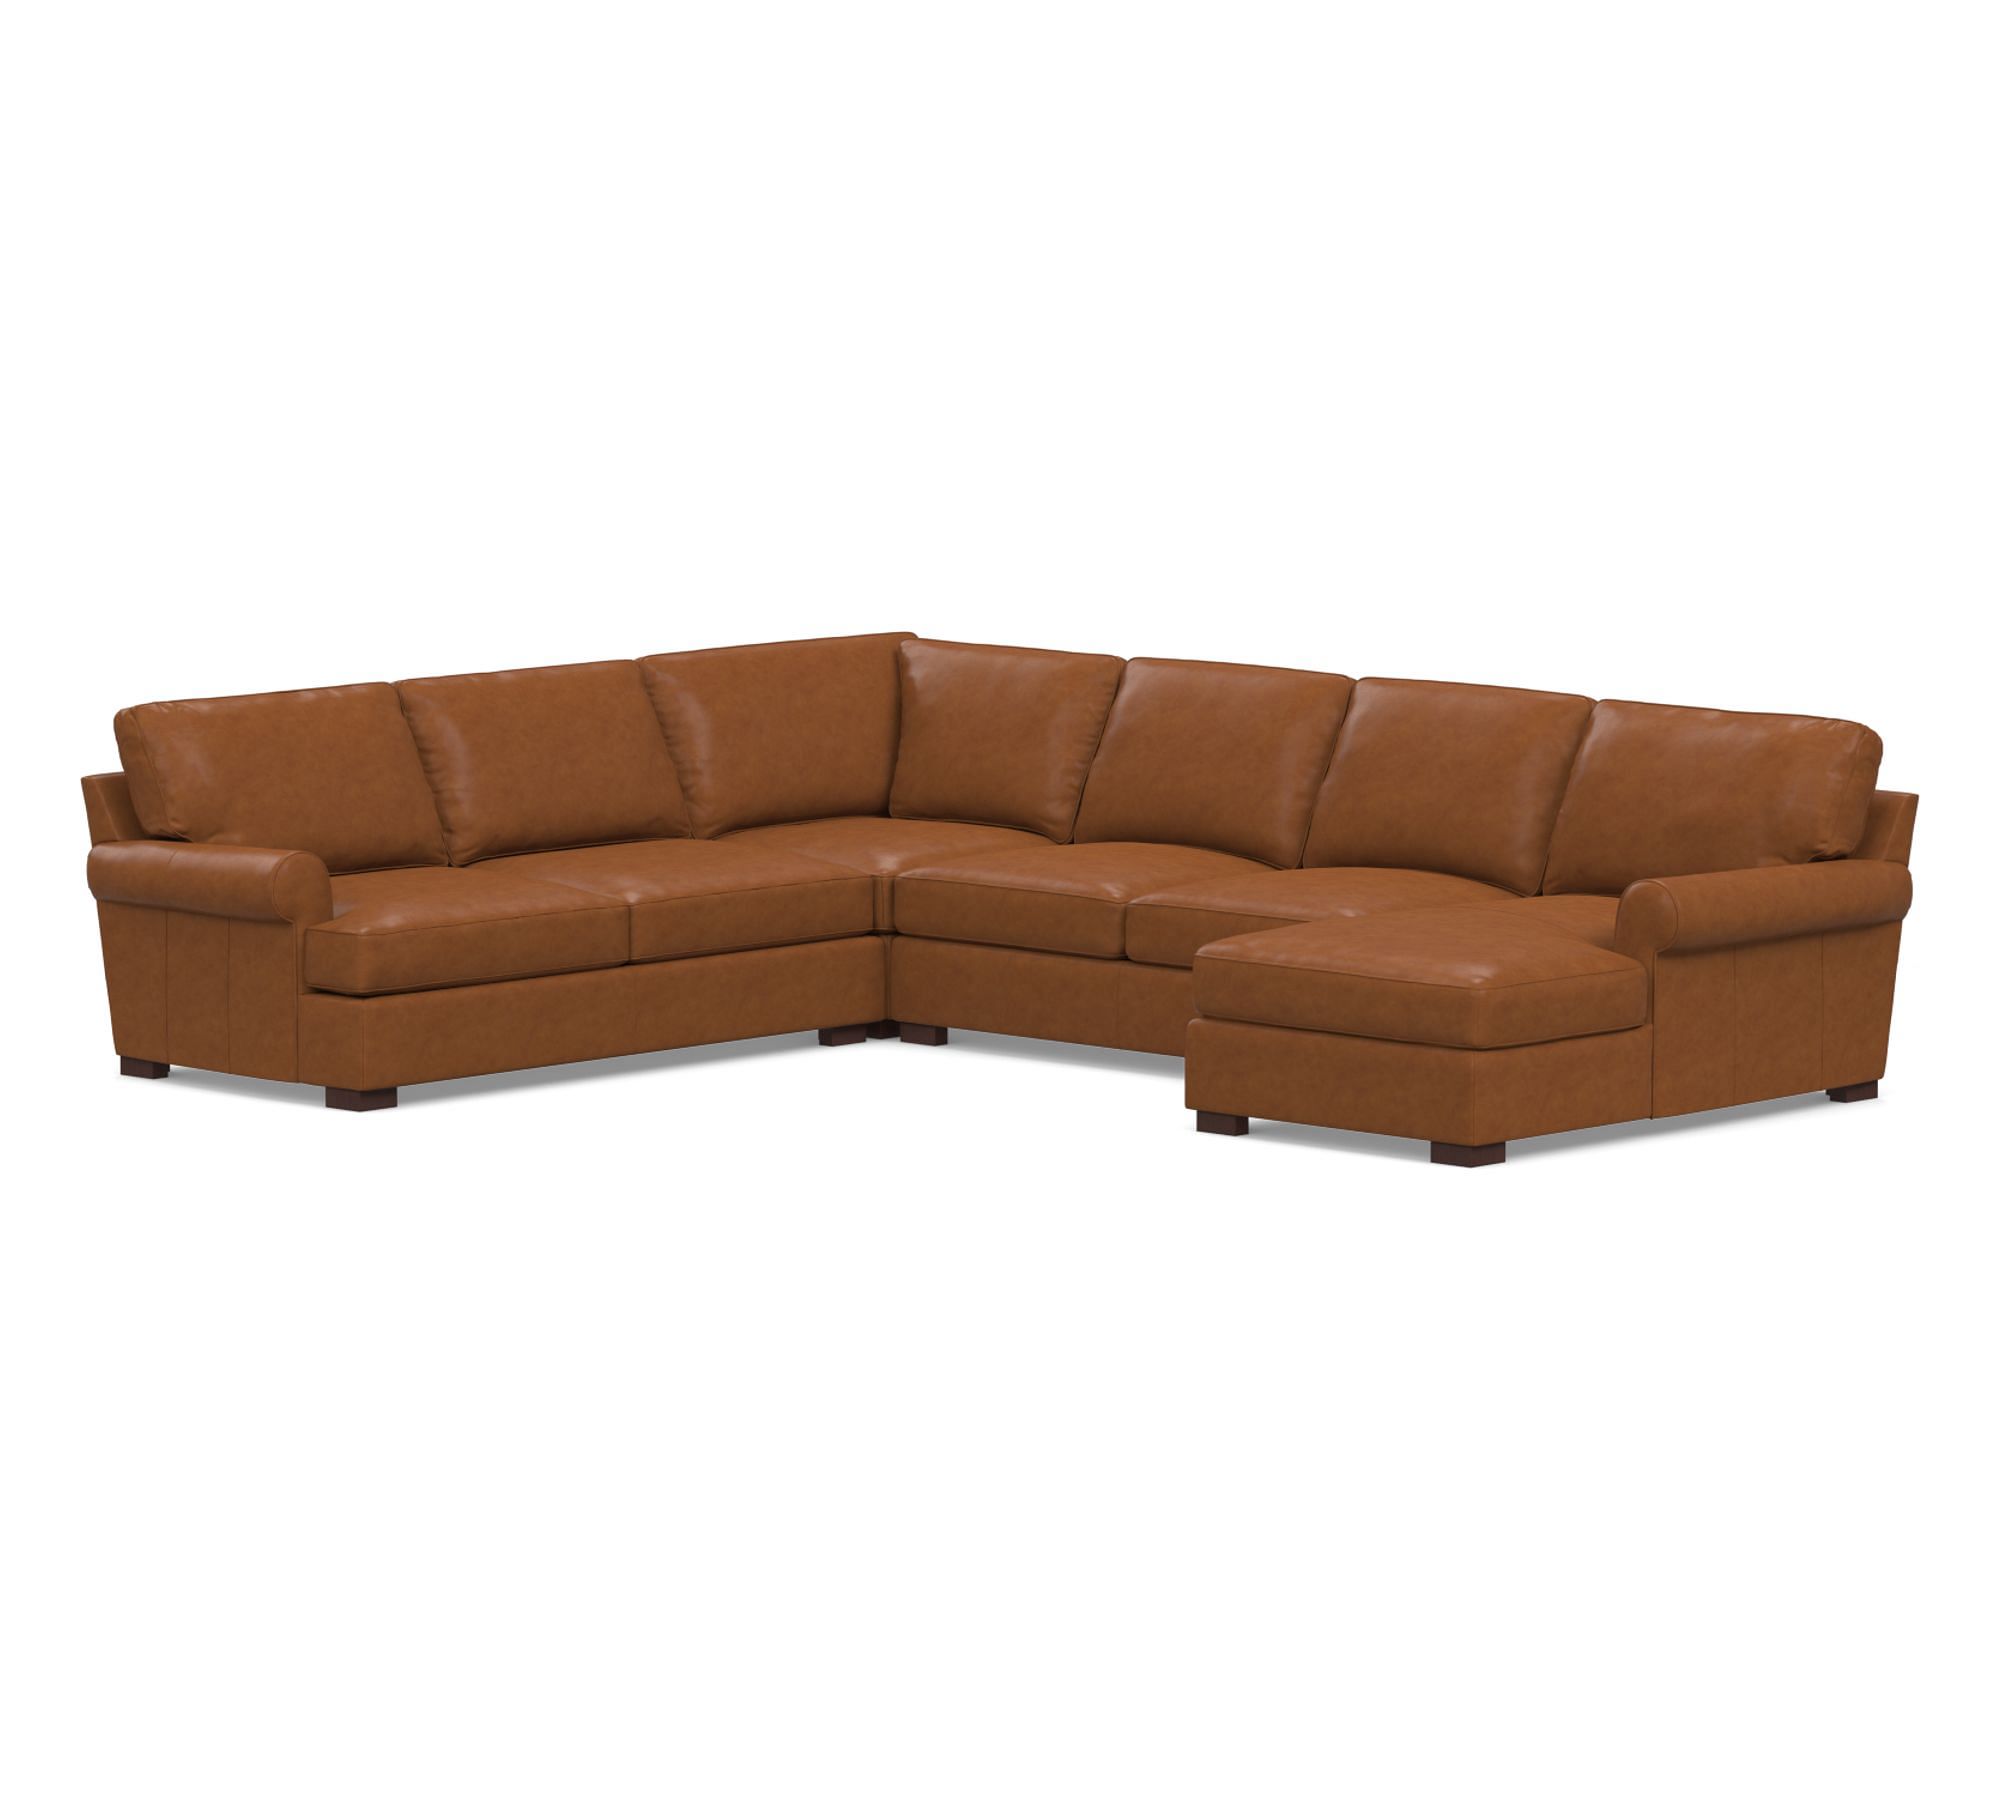 Townsend Roll Arm Leather 4-Piece Chaise Sectional (143")